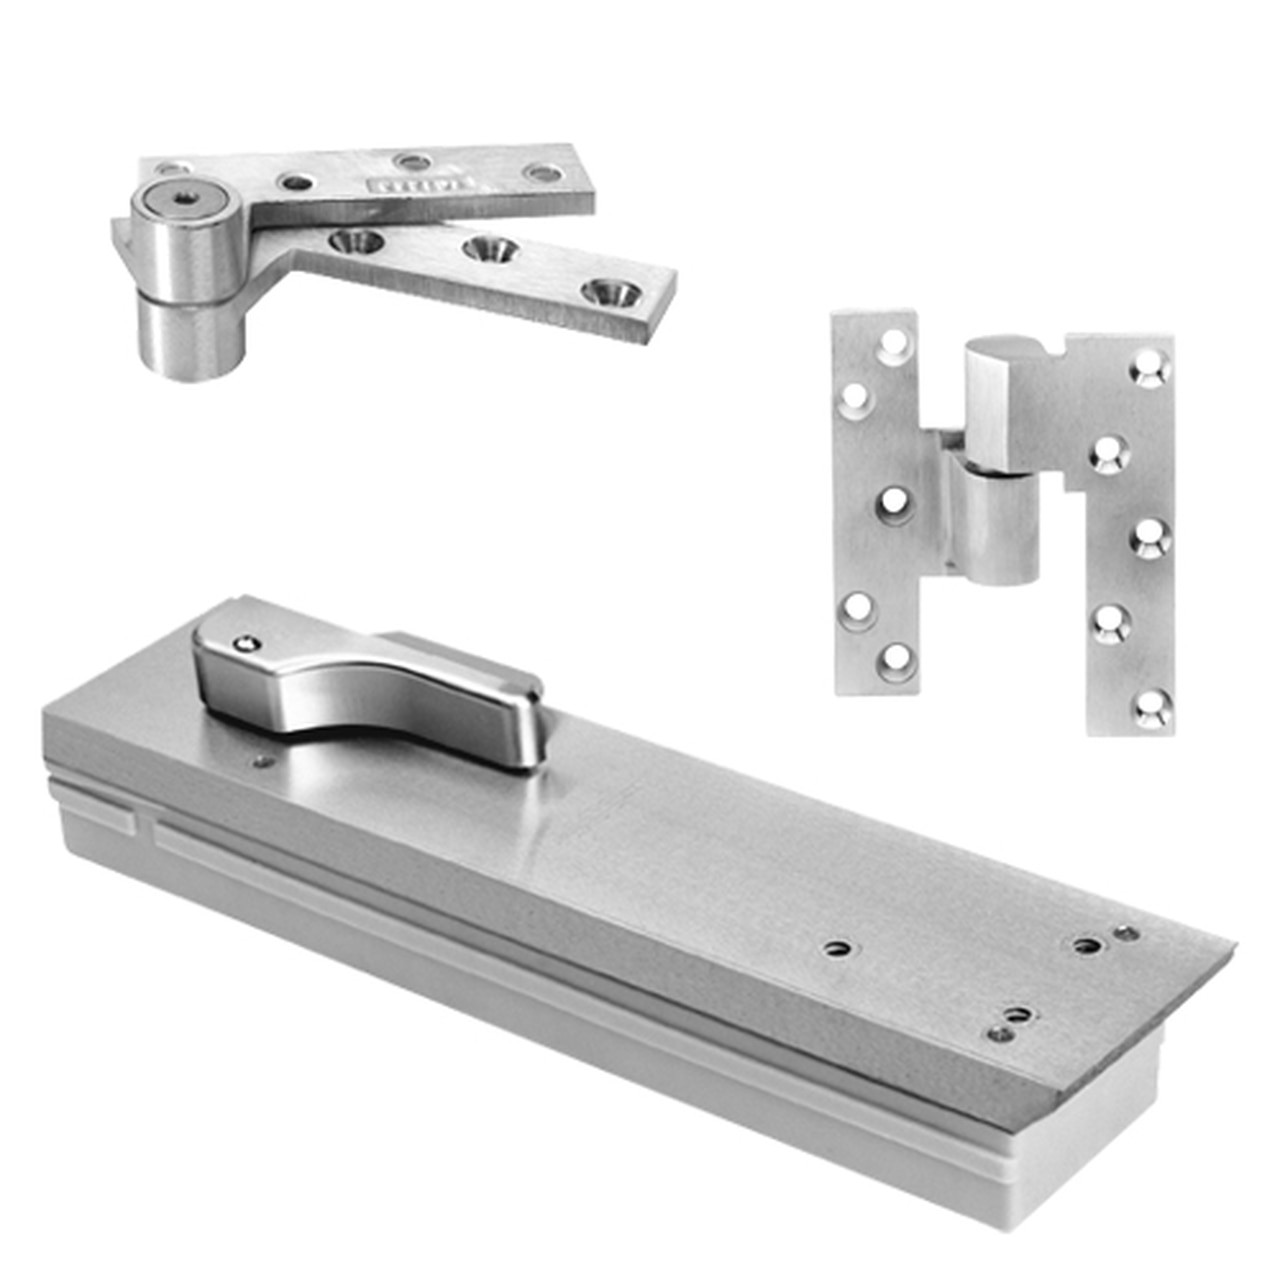 FQ5104NBC-SC-LH-625 Rixson Q51 Series Fire Rated 3/4" Offset Hung Shallow Depth Floor Closers in Bright Chrome Finish